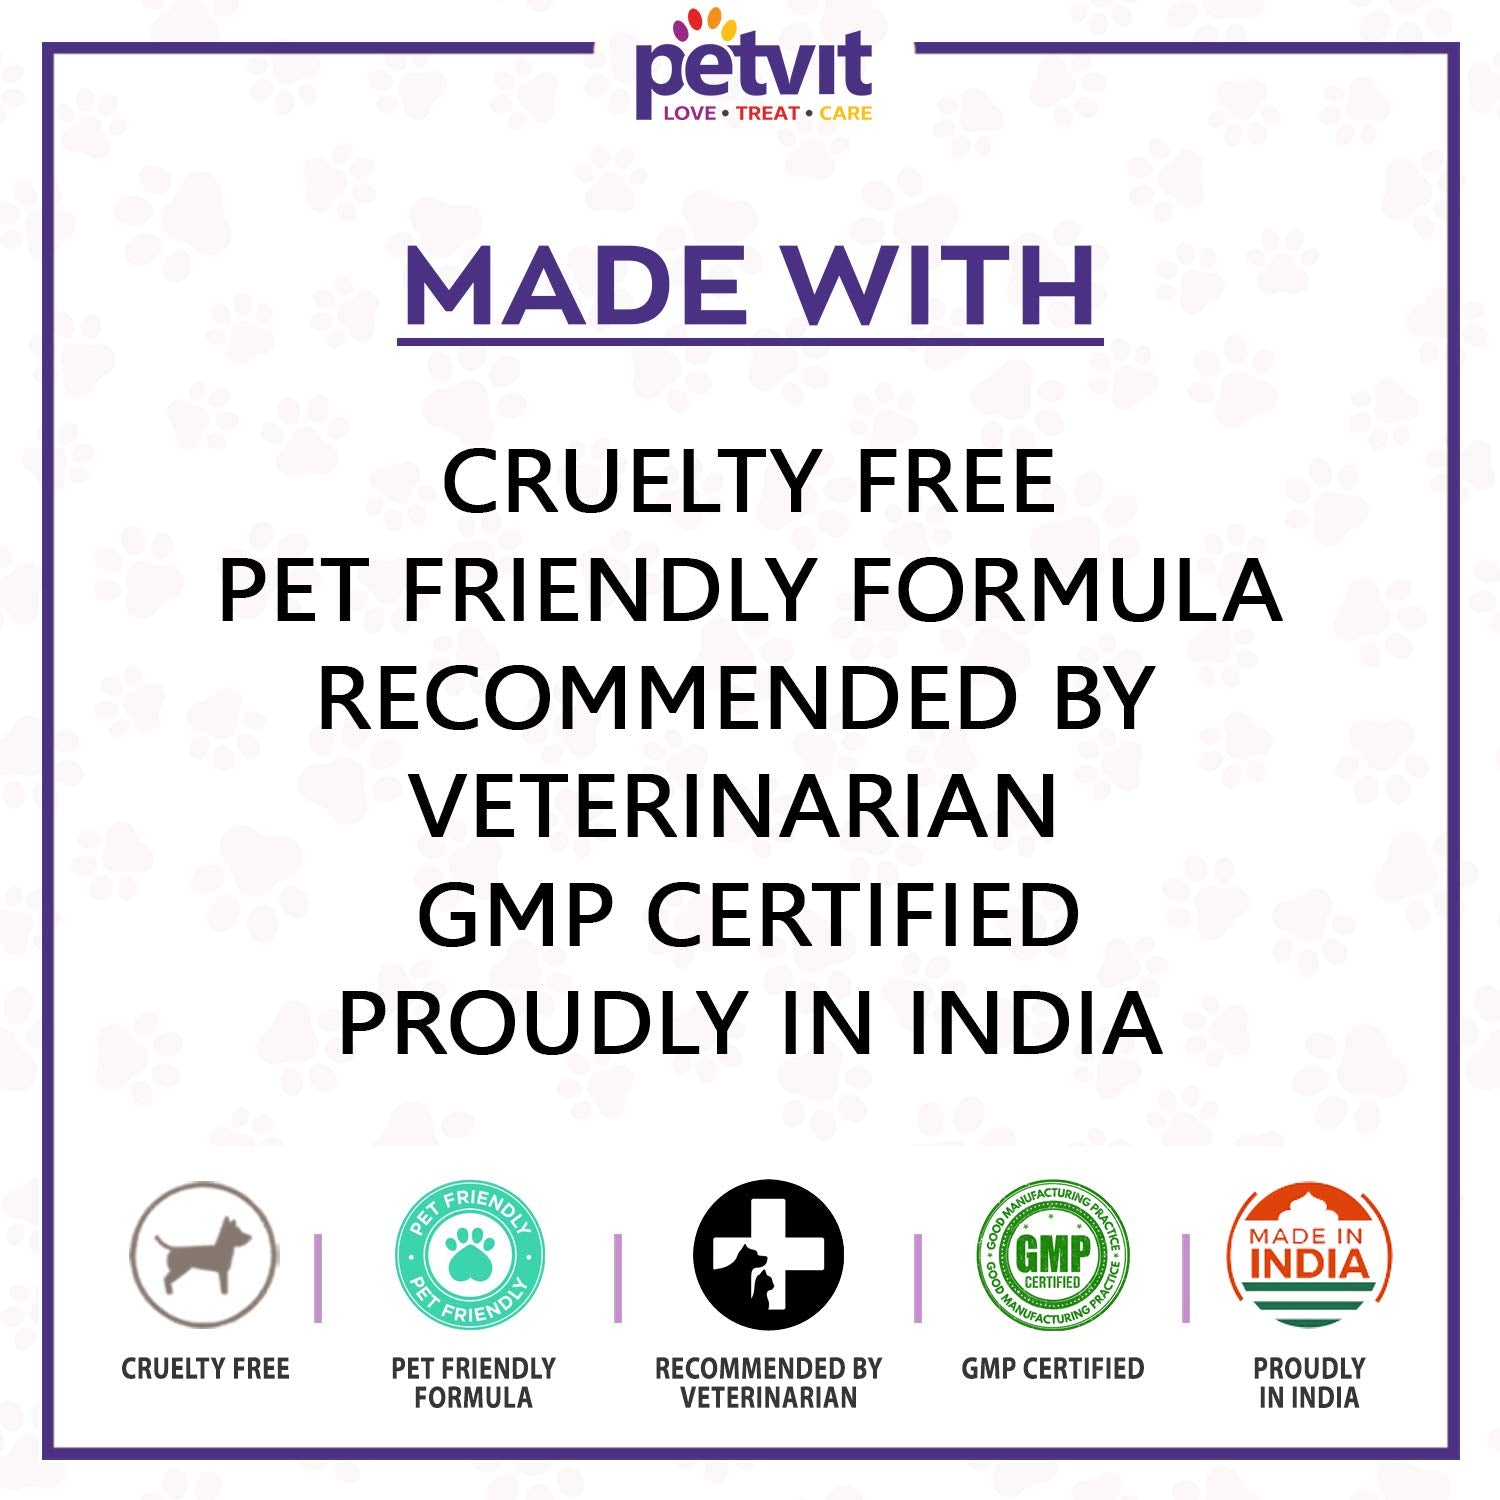 Petvit Beagle 6 in 1 Combo Grooming from Head to Tail for Your Dog|Natural Waterless Shampoo + Anti-Itch Shampoo + Paw Butter + Anti-Tick & flea Shampoo + Pet Sanitizer + Tick Repellent Powder